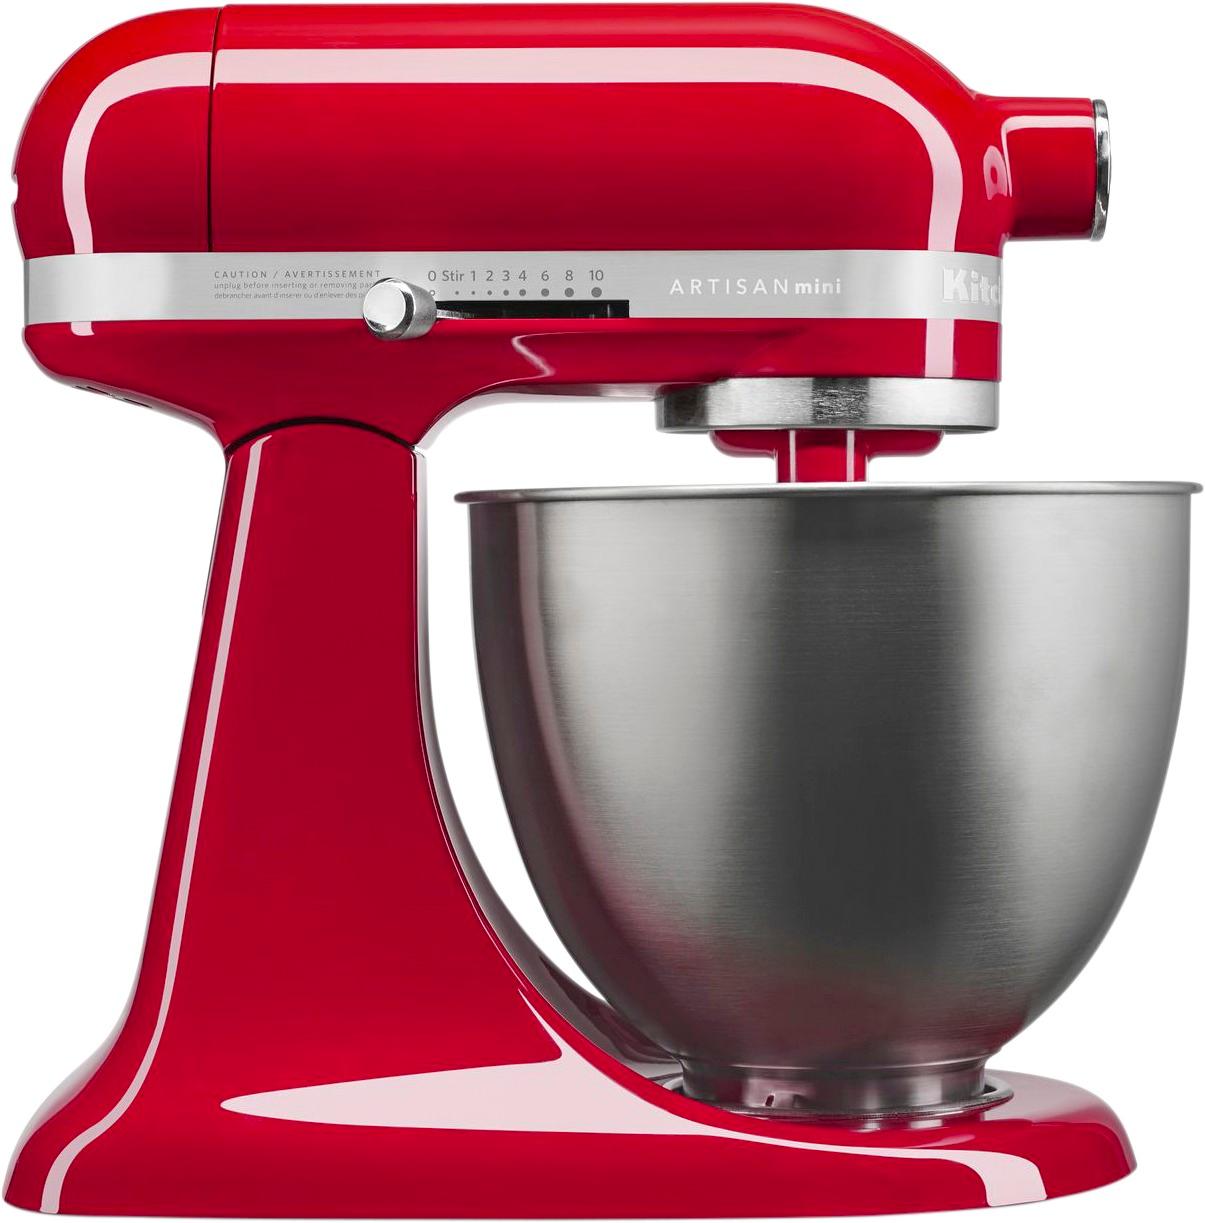 KitchenAid: Save more than $250 on a stand mixer at Best Buy right now